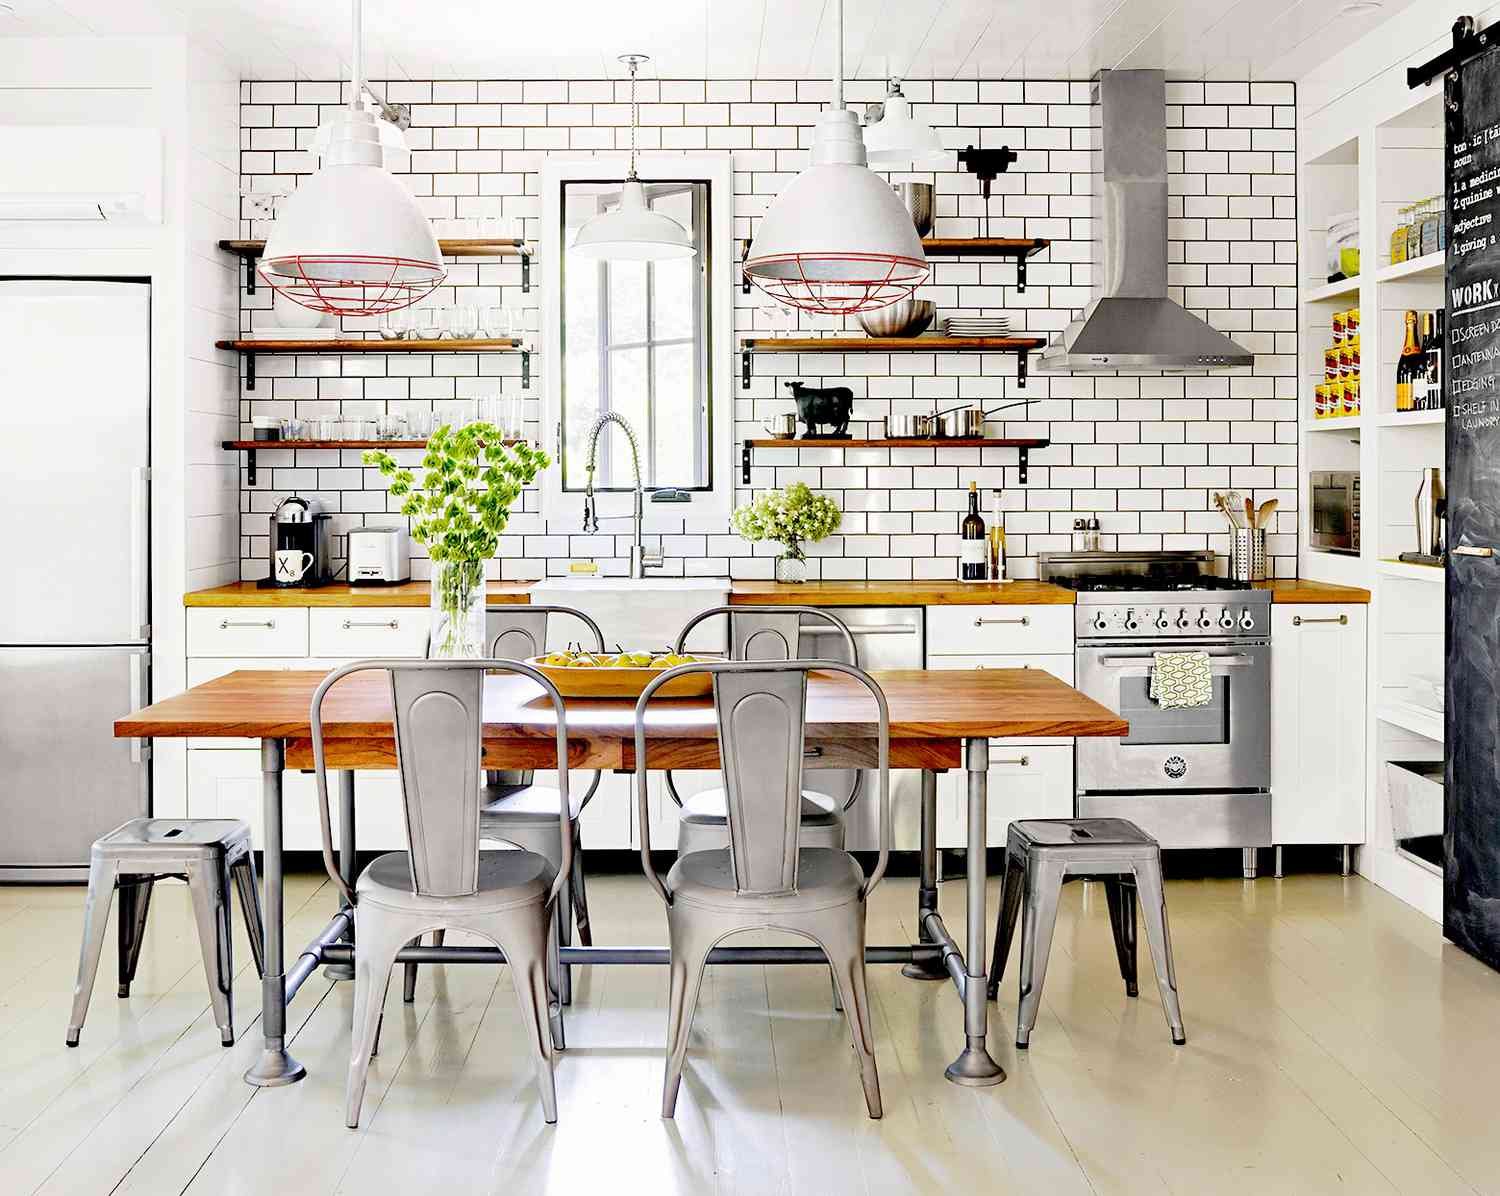 Kitchen with white brick and dining room seating